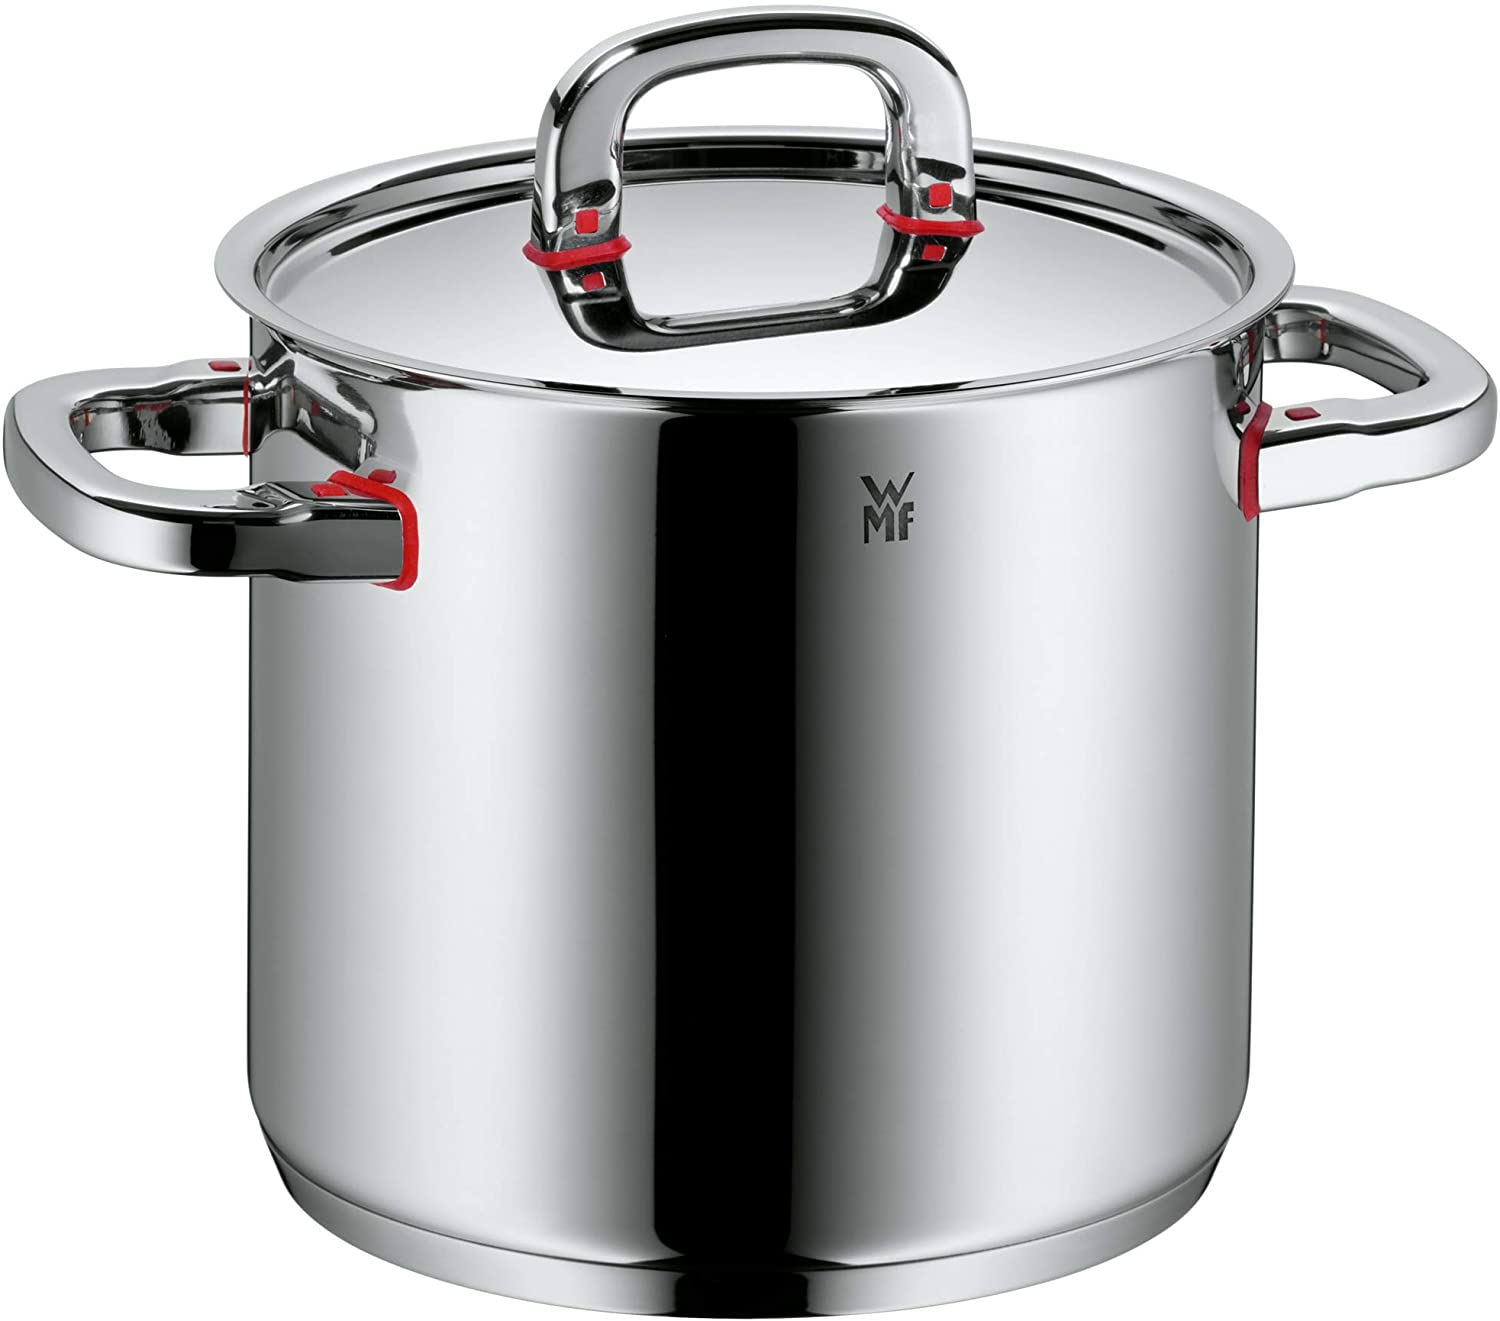 WMF Premium One 18/10 Stainless Steel 20cm Stock Pot with Lid